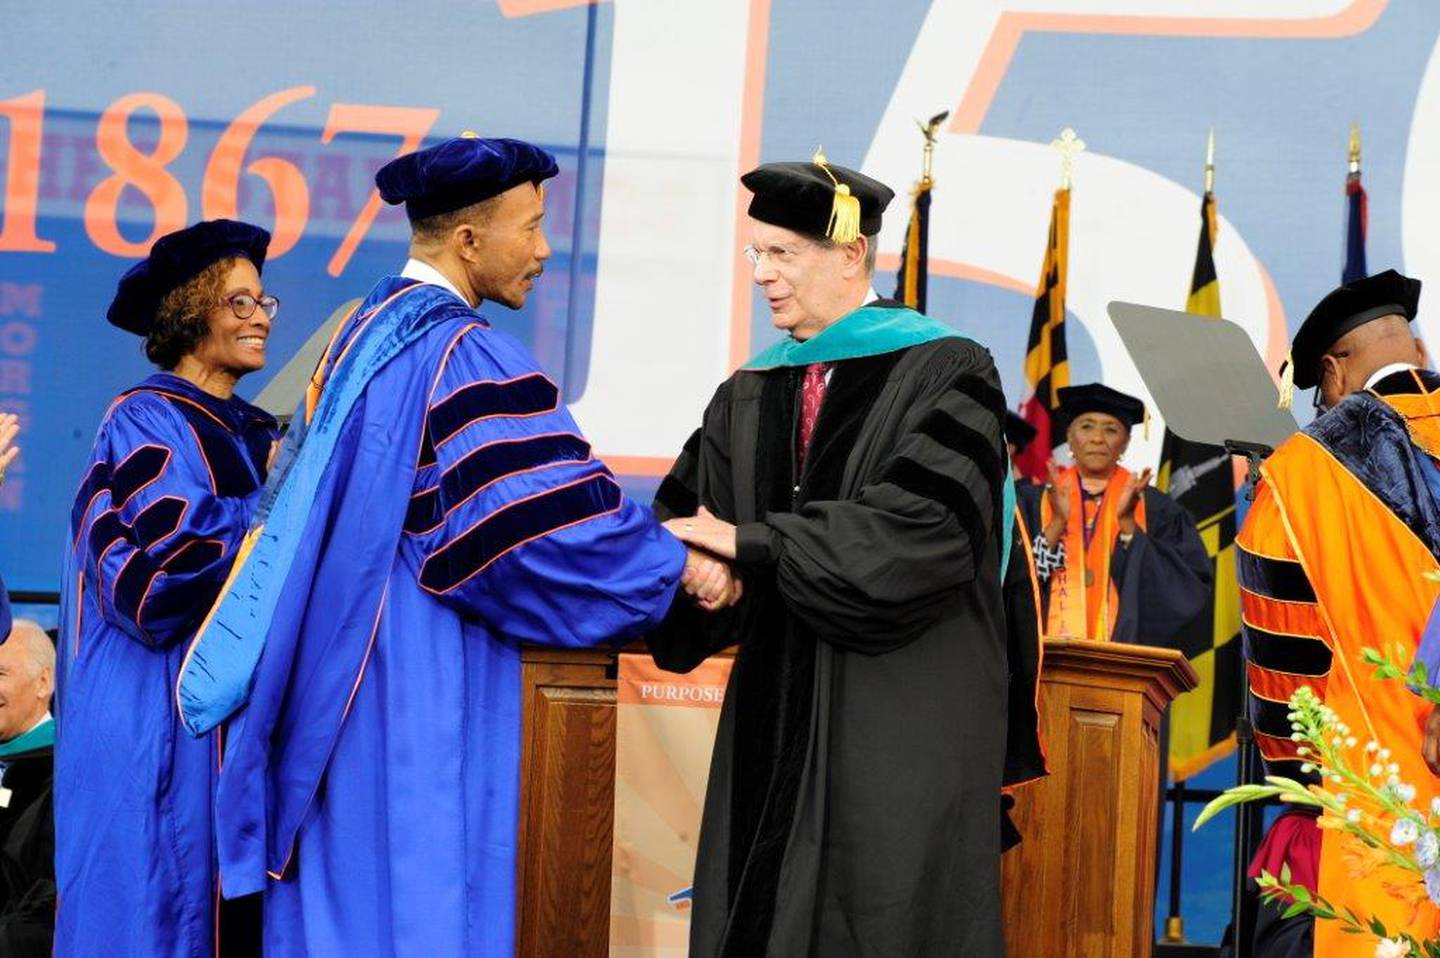 Sheldon Goldseker shakes hands with Congressman Kweisi Mfume at Morgan State University's commencement ceremony in 2017.